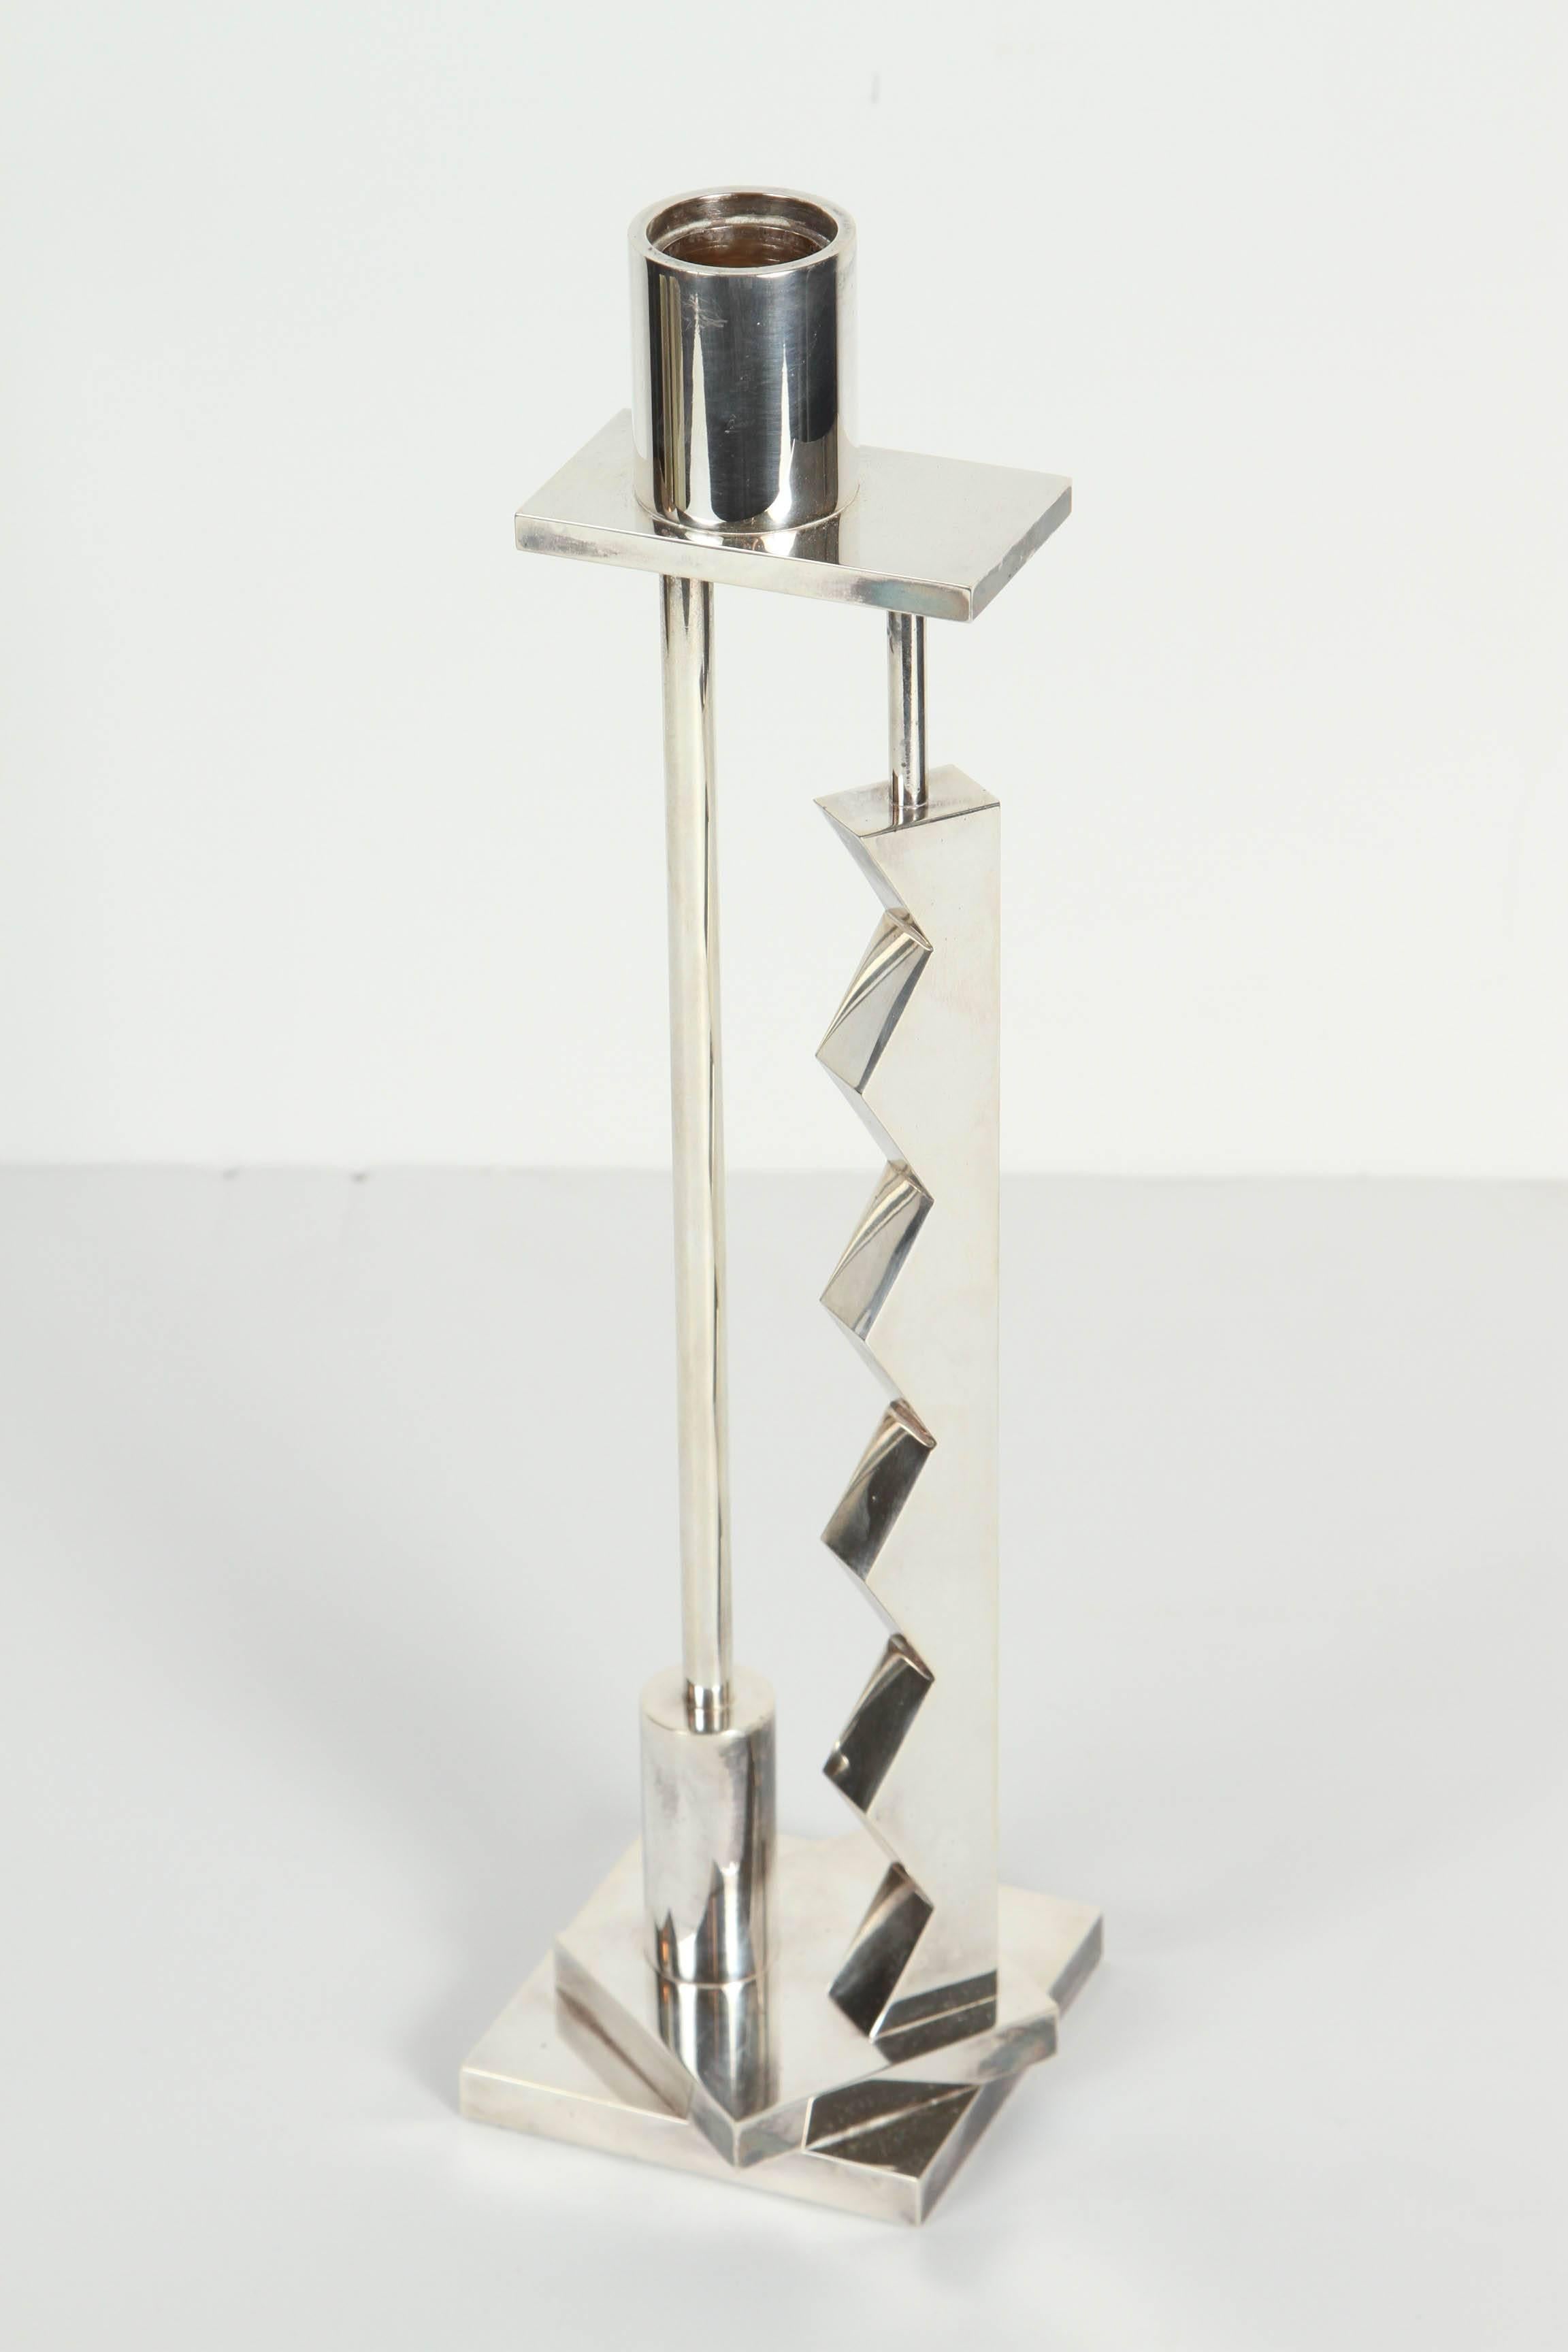 American Silver-Plated Candlestick by Ettore Sottsass for Swid Powell